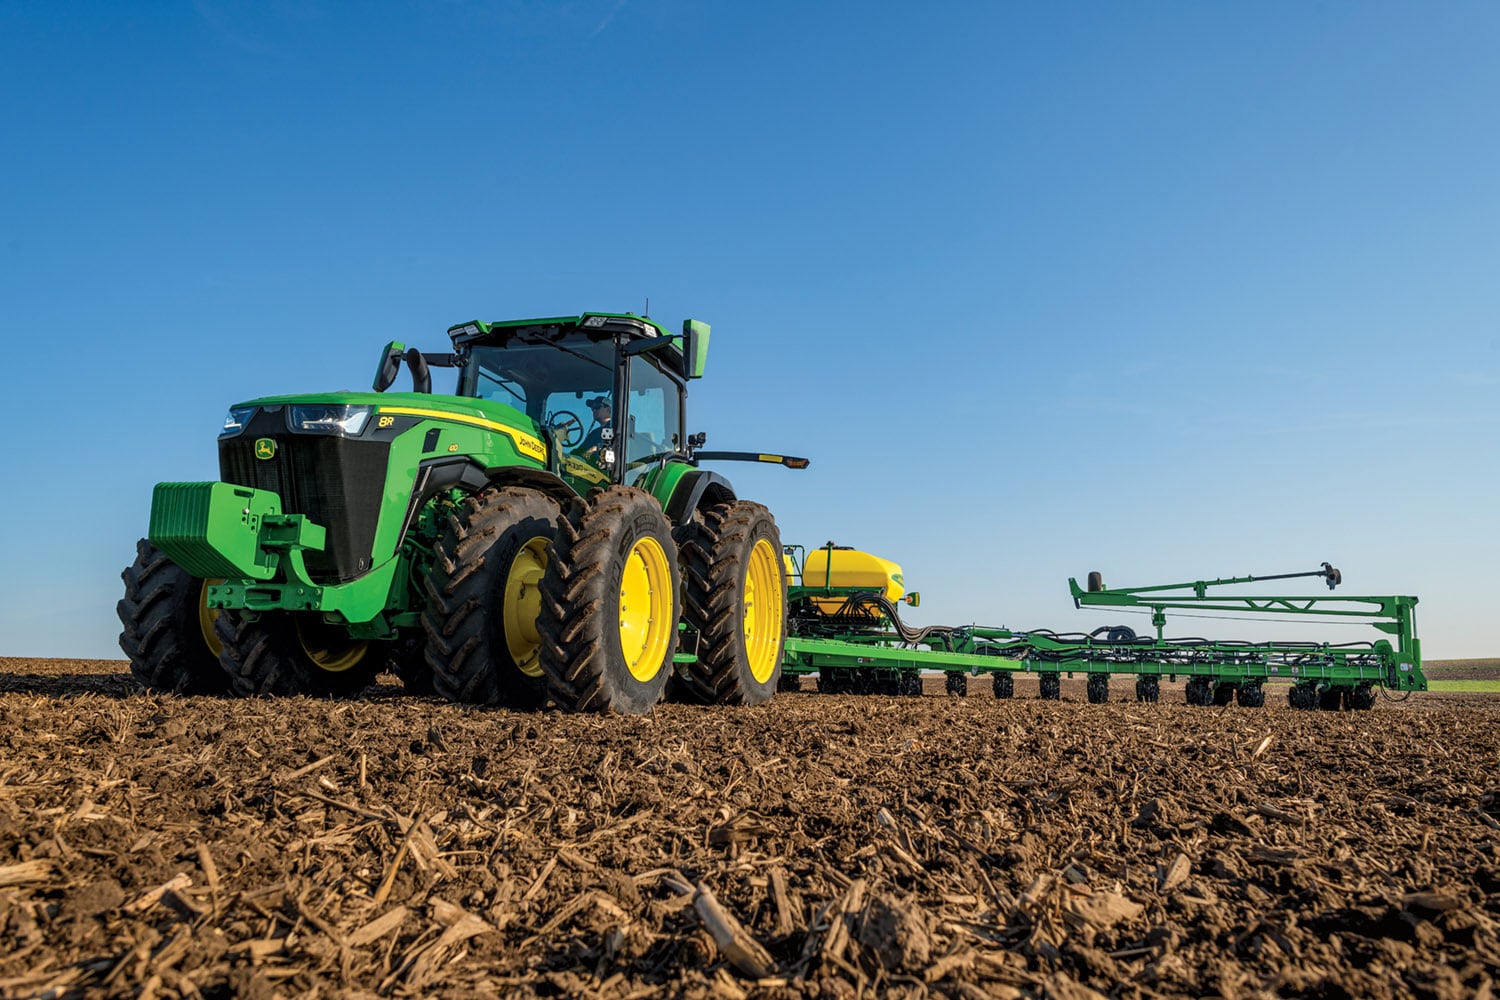 Seven models of John Deere 8R Wheel Tractors are offered from 230 to 410 horsepower including the 8R 410 shown here. 